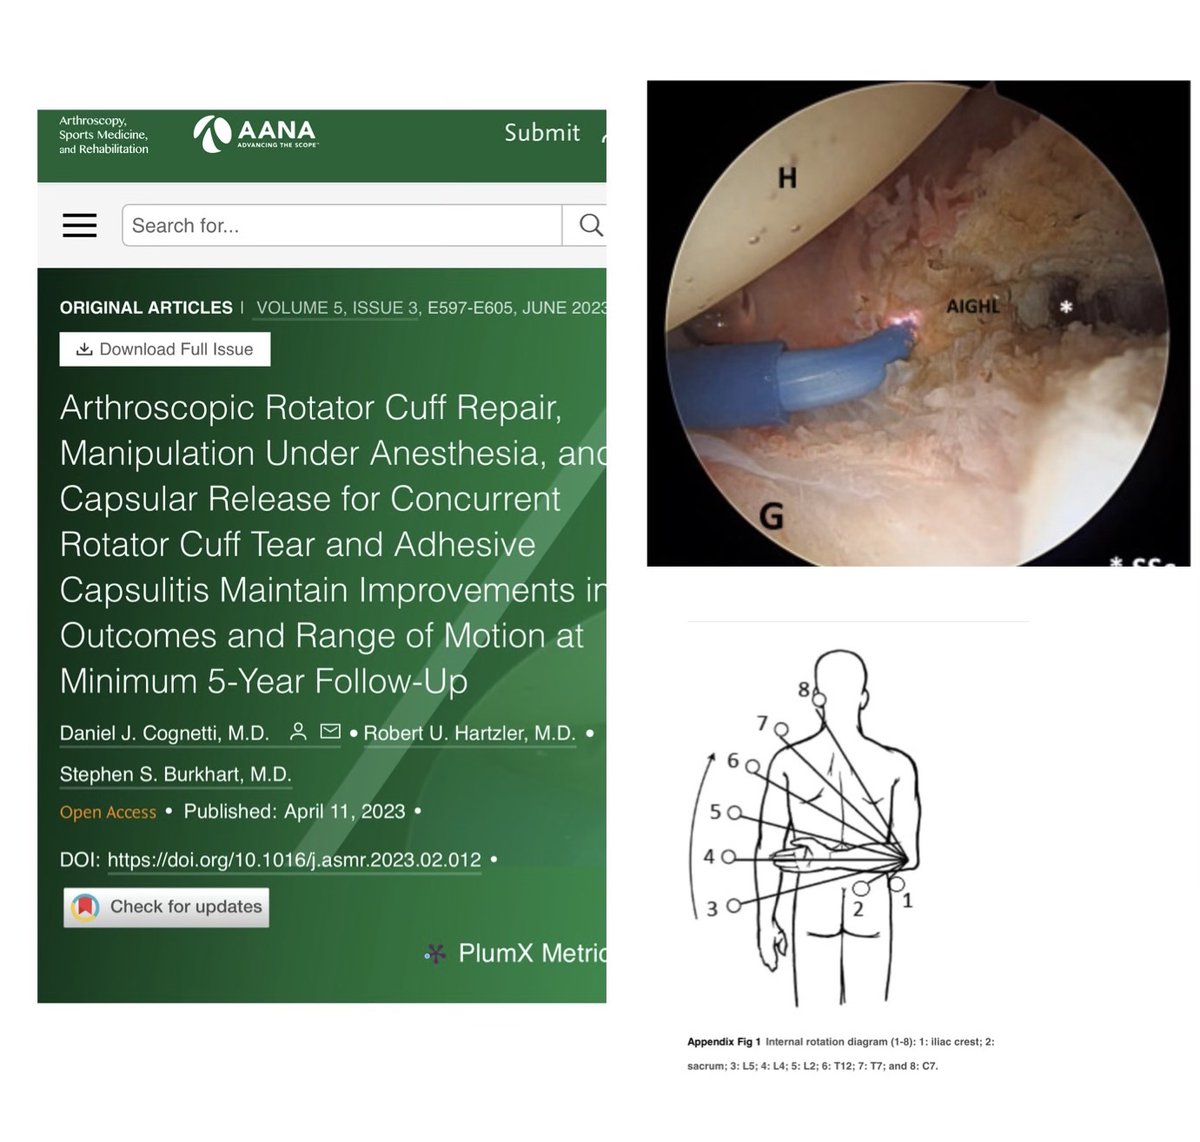 Should we manipulate and repair at the same time??? Arthroscopic Rotator Cuff Repair, Manipulation Under Anesthesia, and Capsular Release for Concurrent Rotator Cuff Tear and Adhesive Capsulitis Maintain Improvements in Outcomes and Range of Motion at Minimum 5-Year Follow-Up